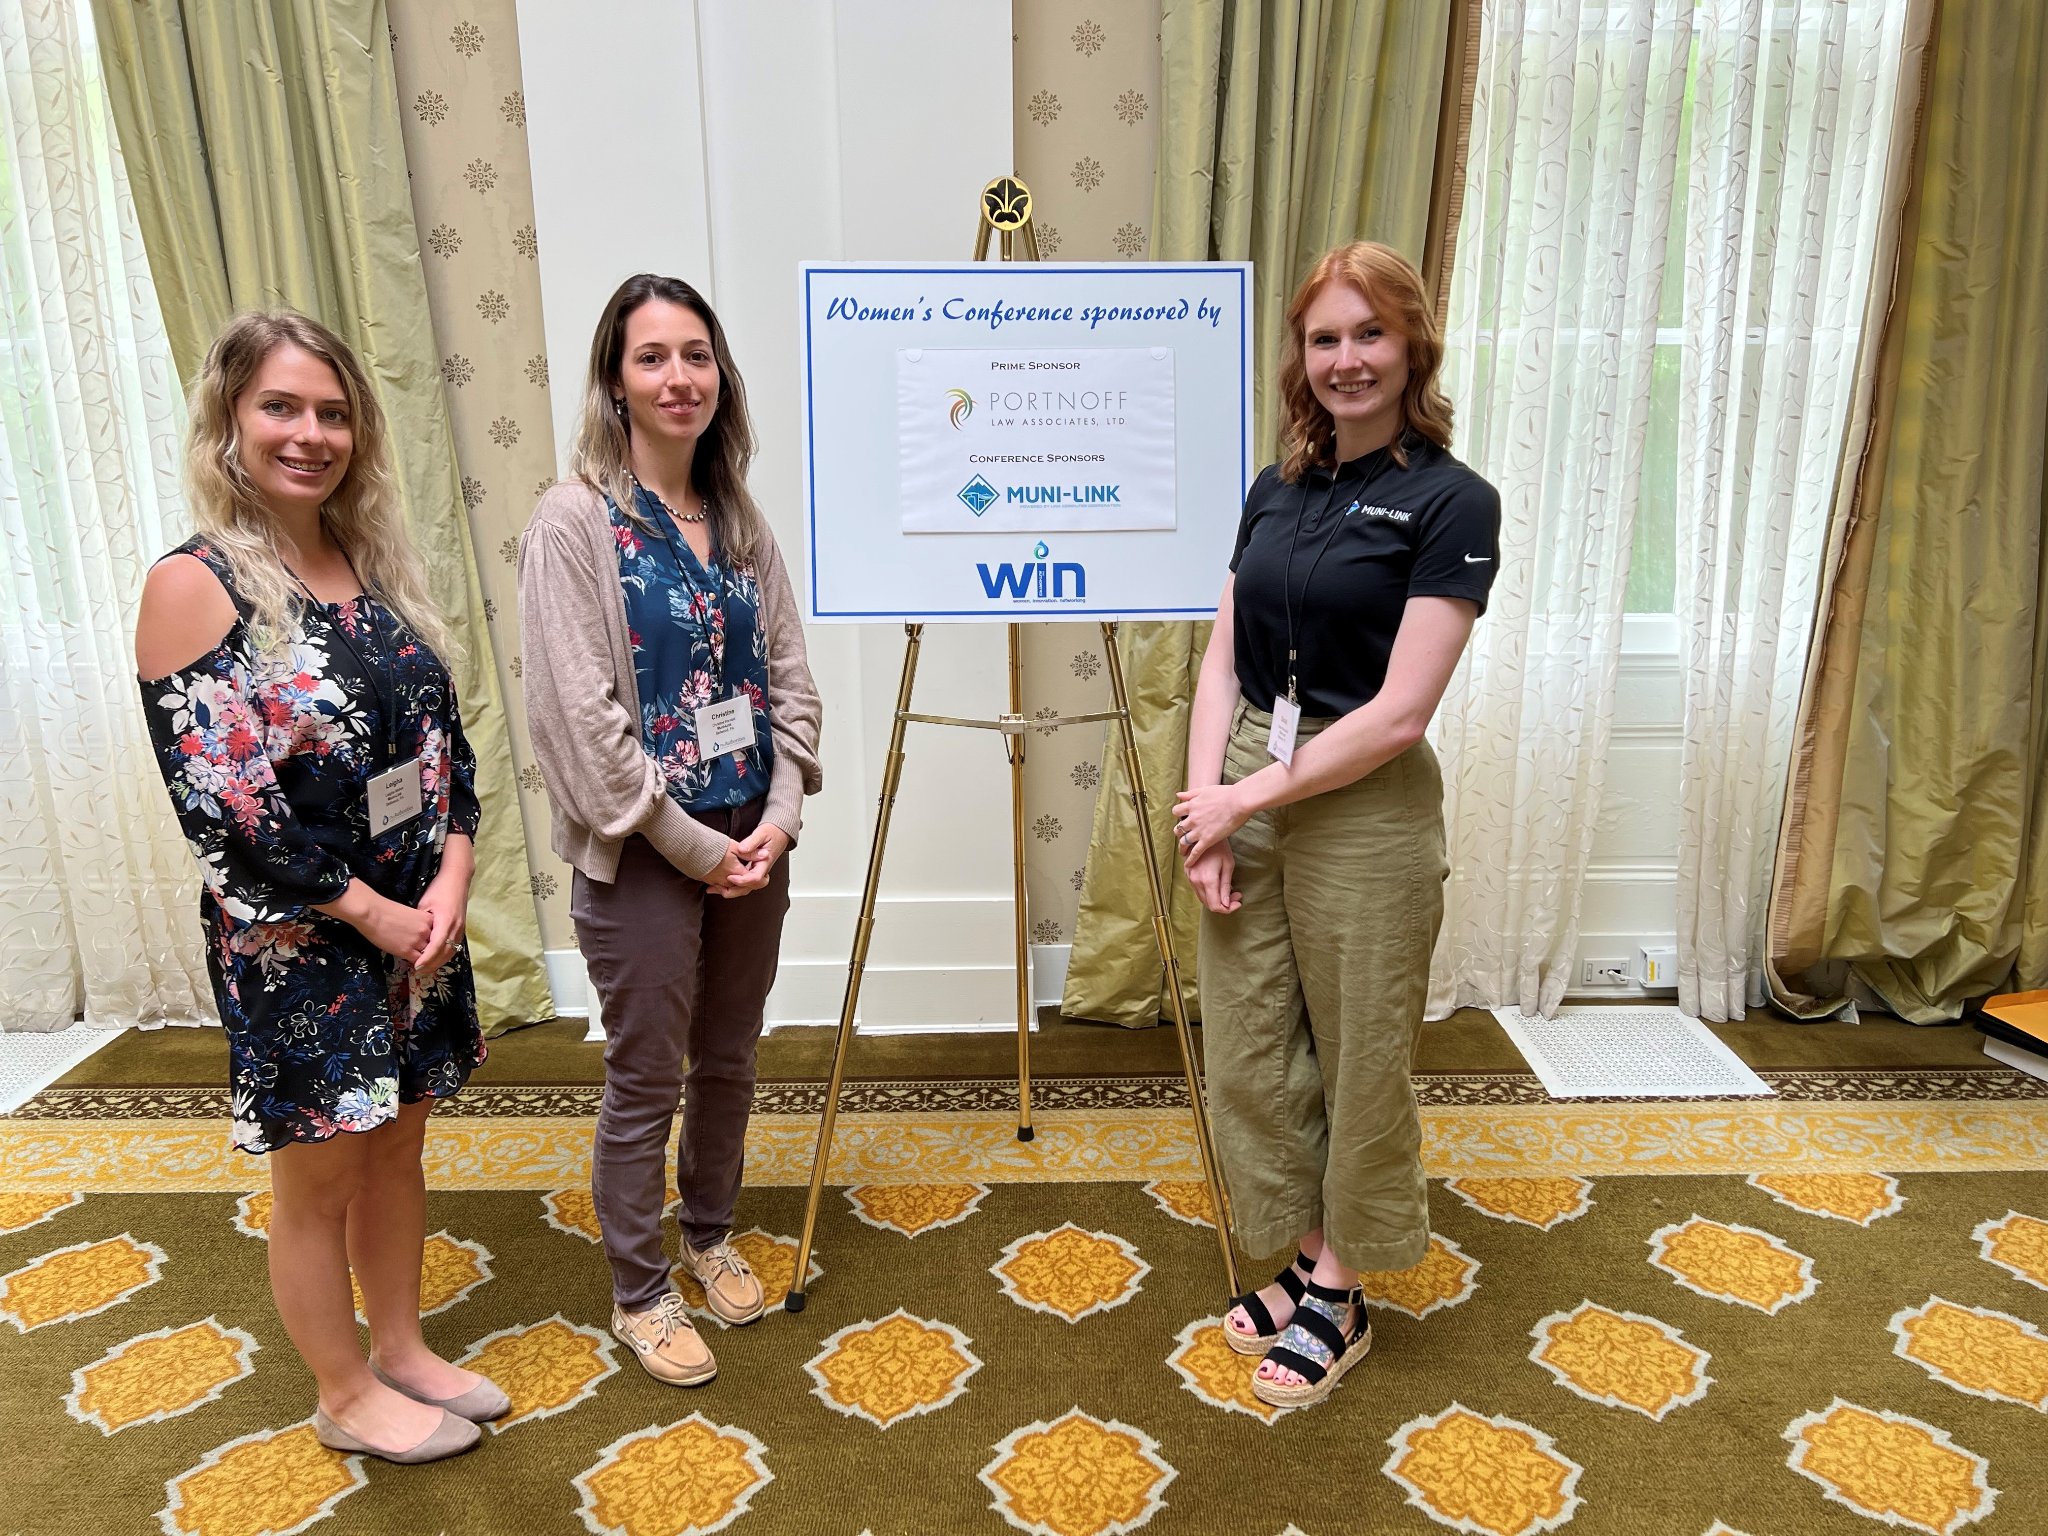 Muni-Link employees sponsoring the WIN conference